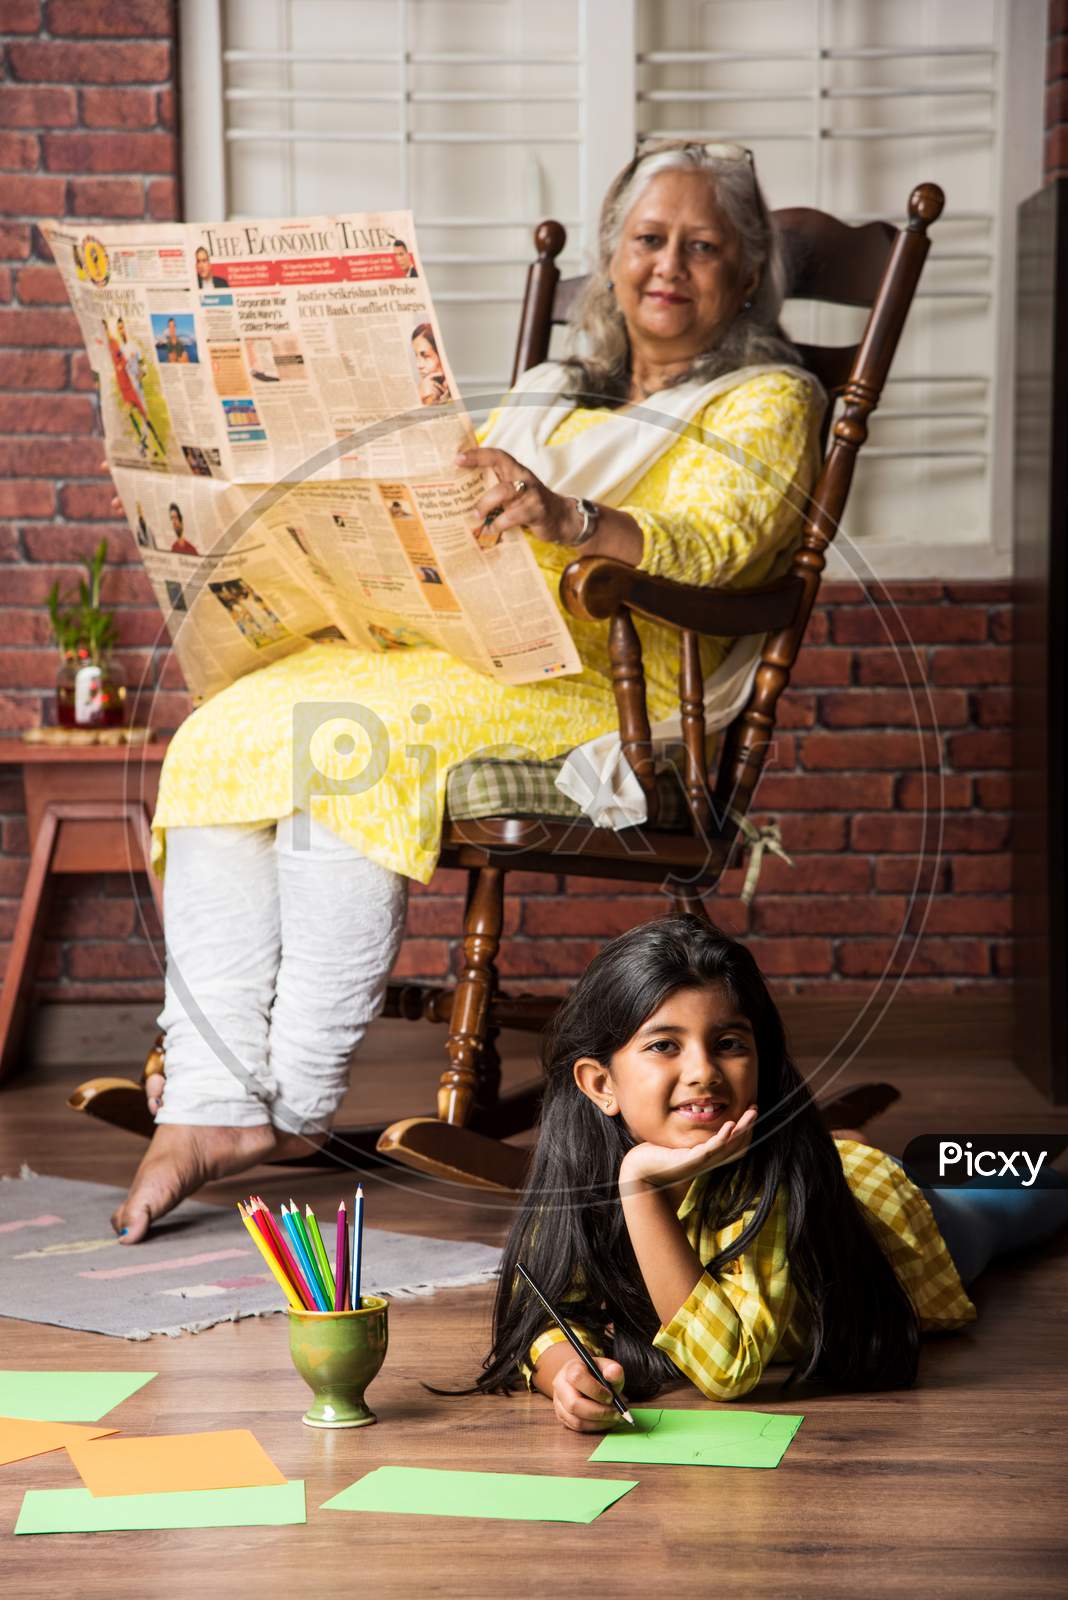 Happy moments with grandma, indian/asian senior lady spending quality time with her grand daughter